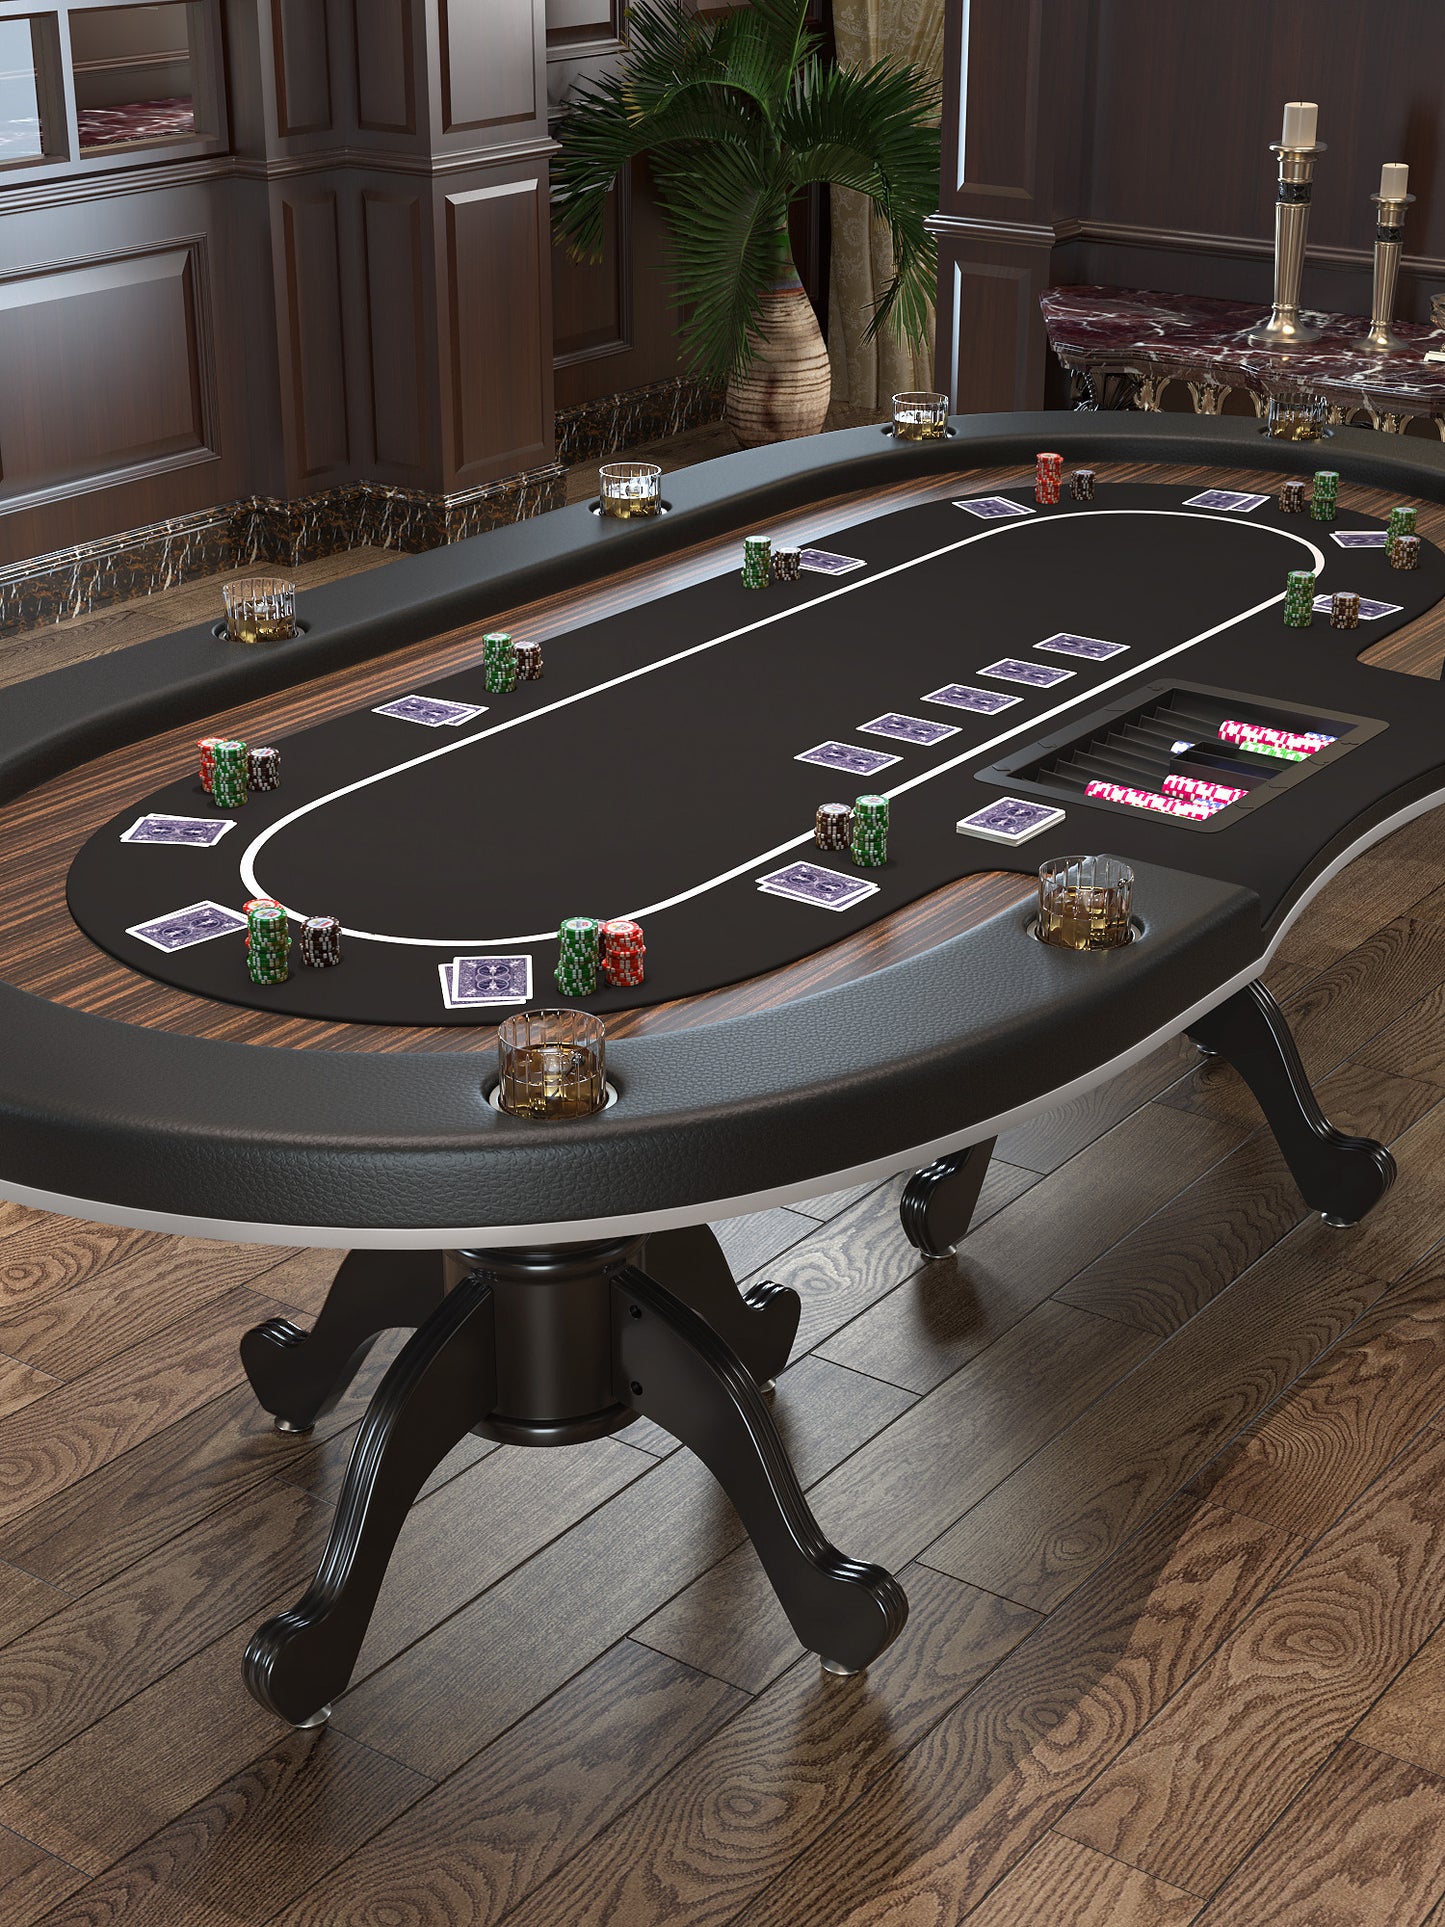 96" Aura Max Poker Table with Jumbo Cup Holders Waterproof Felt with Bet line